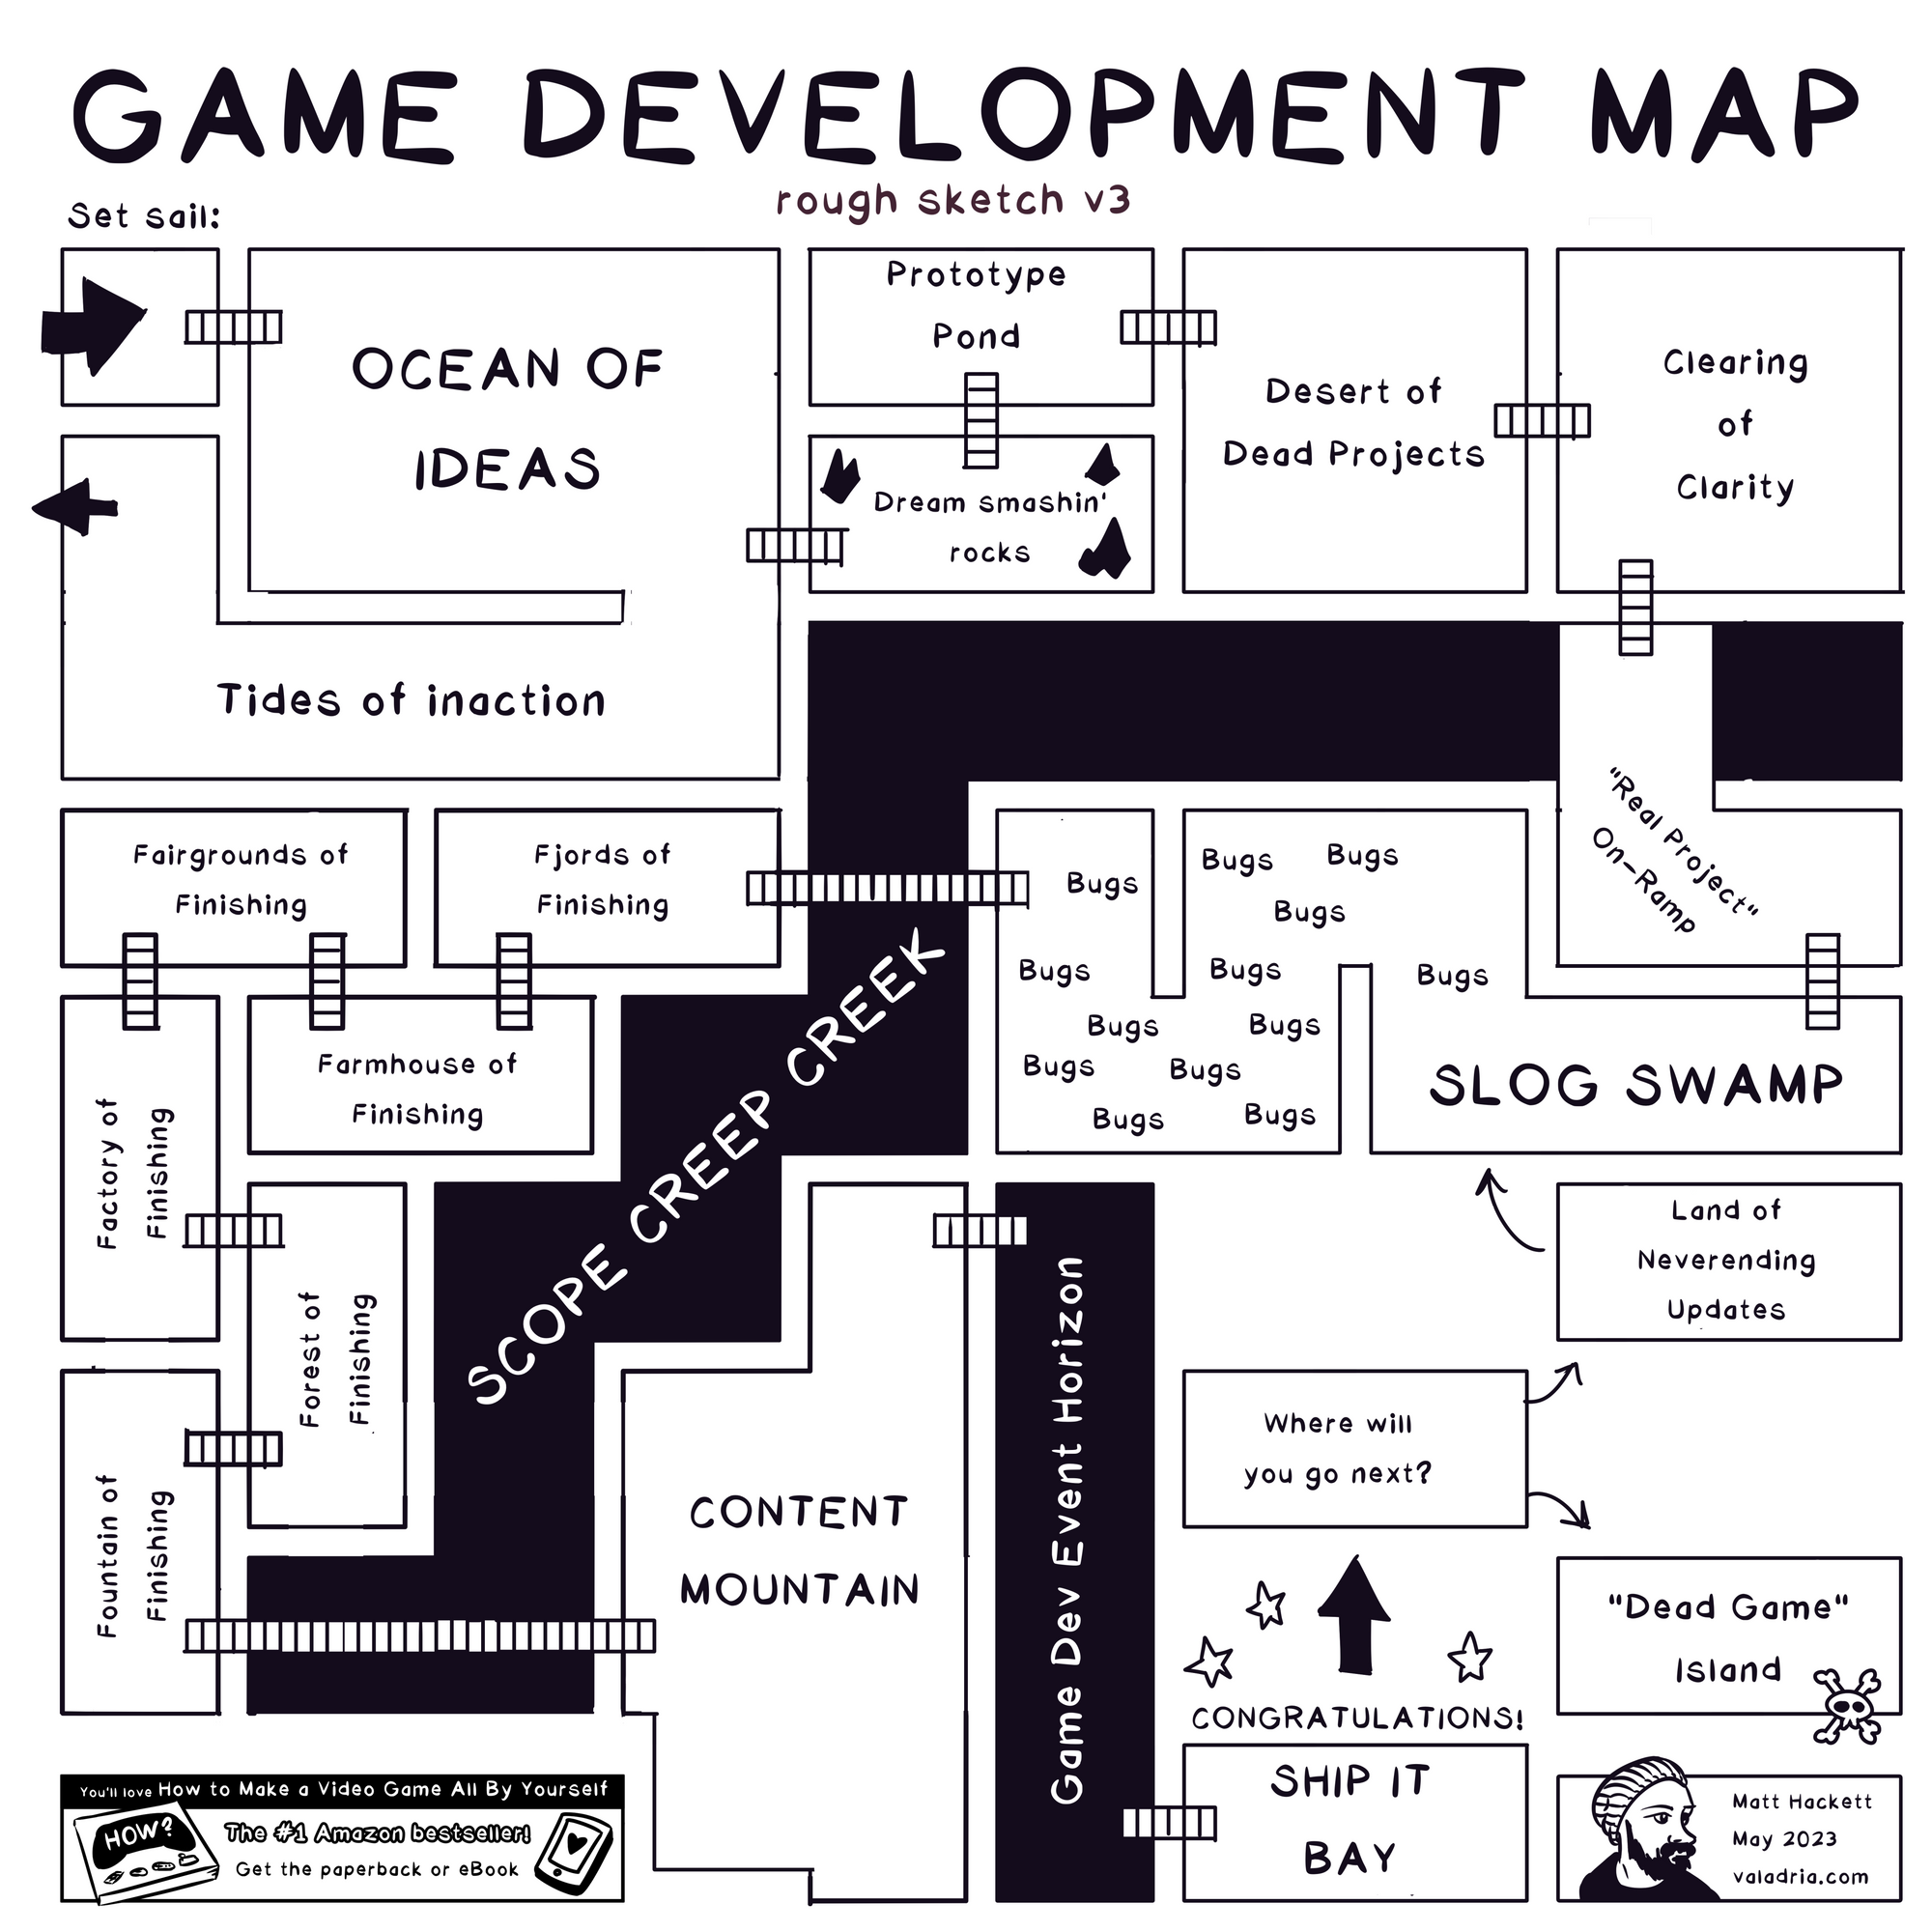 GAME DEVELOPMENT MAP rough sketch v3 Set sail: OCEAN OF IDEAS <- Tides of inaction Dream smashin' rocks Prototype Pond Desert of Dead Projects Clearing of Clarity "Real Project" On-Ramp SLOG SWAMP Bugs Bugs Bugs Bugs Bugs Bugs Bugs Bugs Bugs Bugs Bugs Bugs Bugs SCOPE CREEP CREEK Fjords of finishing Farmhouse of finishing Fairgrounds of finishing Factory of finishing Forest of finishing Fountain of finishing CONTENT MOUNTAIN Game Dev Event Horizon SHIP IT BAY CONGRATULATIONS! Where will you go next? Land of Neverending Updates (GOTO SLOG SWAMP) or "Dead Game" Island From Matt Hackett, author of How to Make a Video Game All By Yourself May 2023 valadria.com